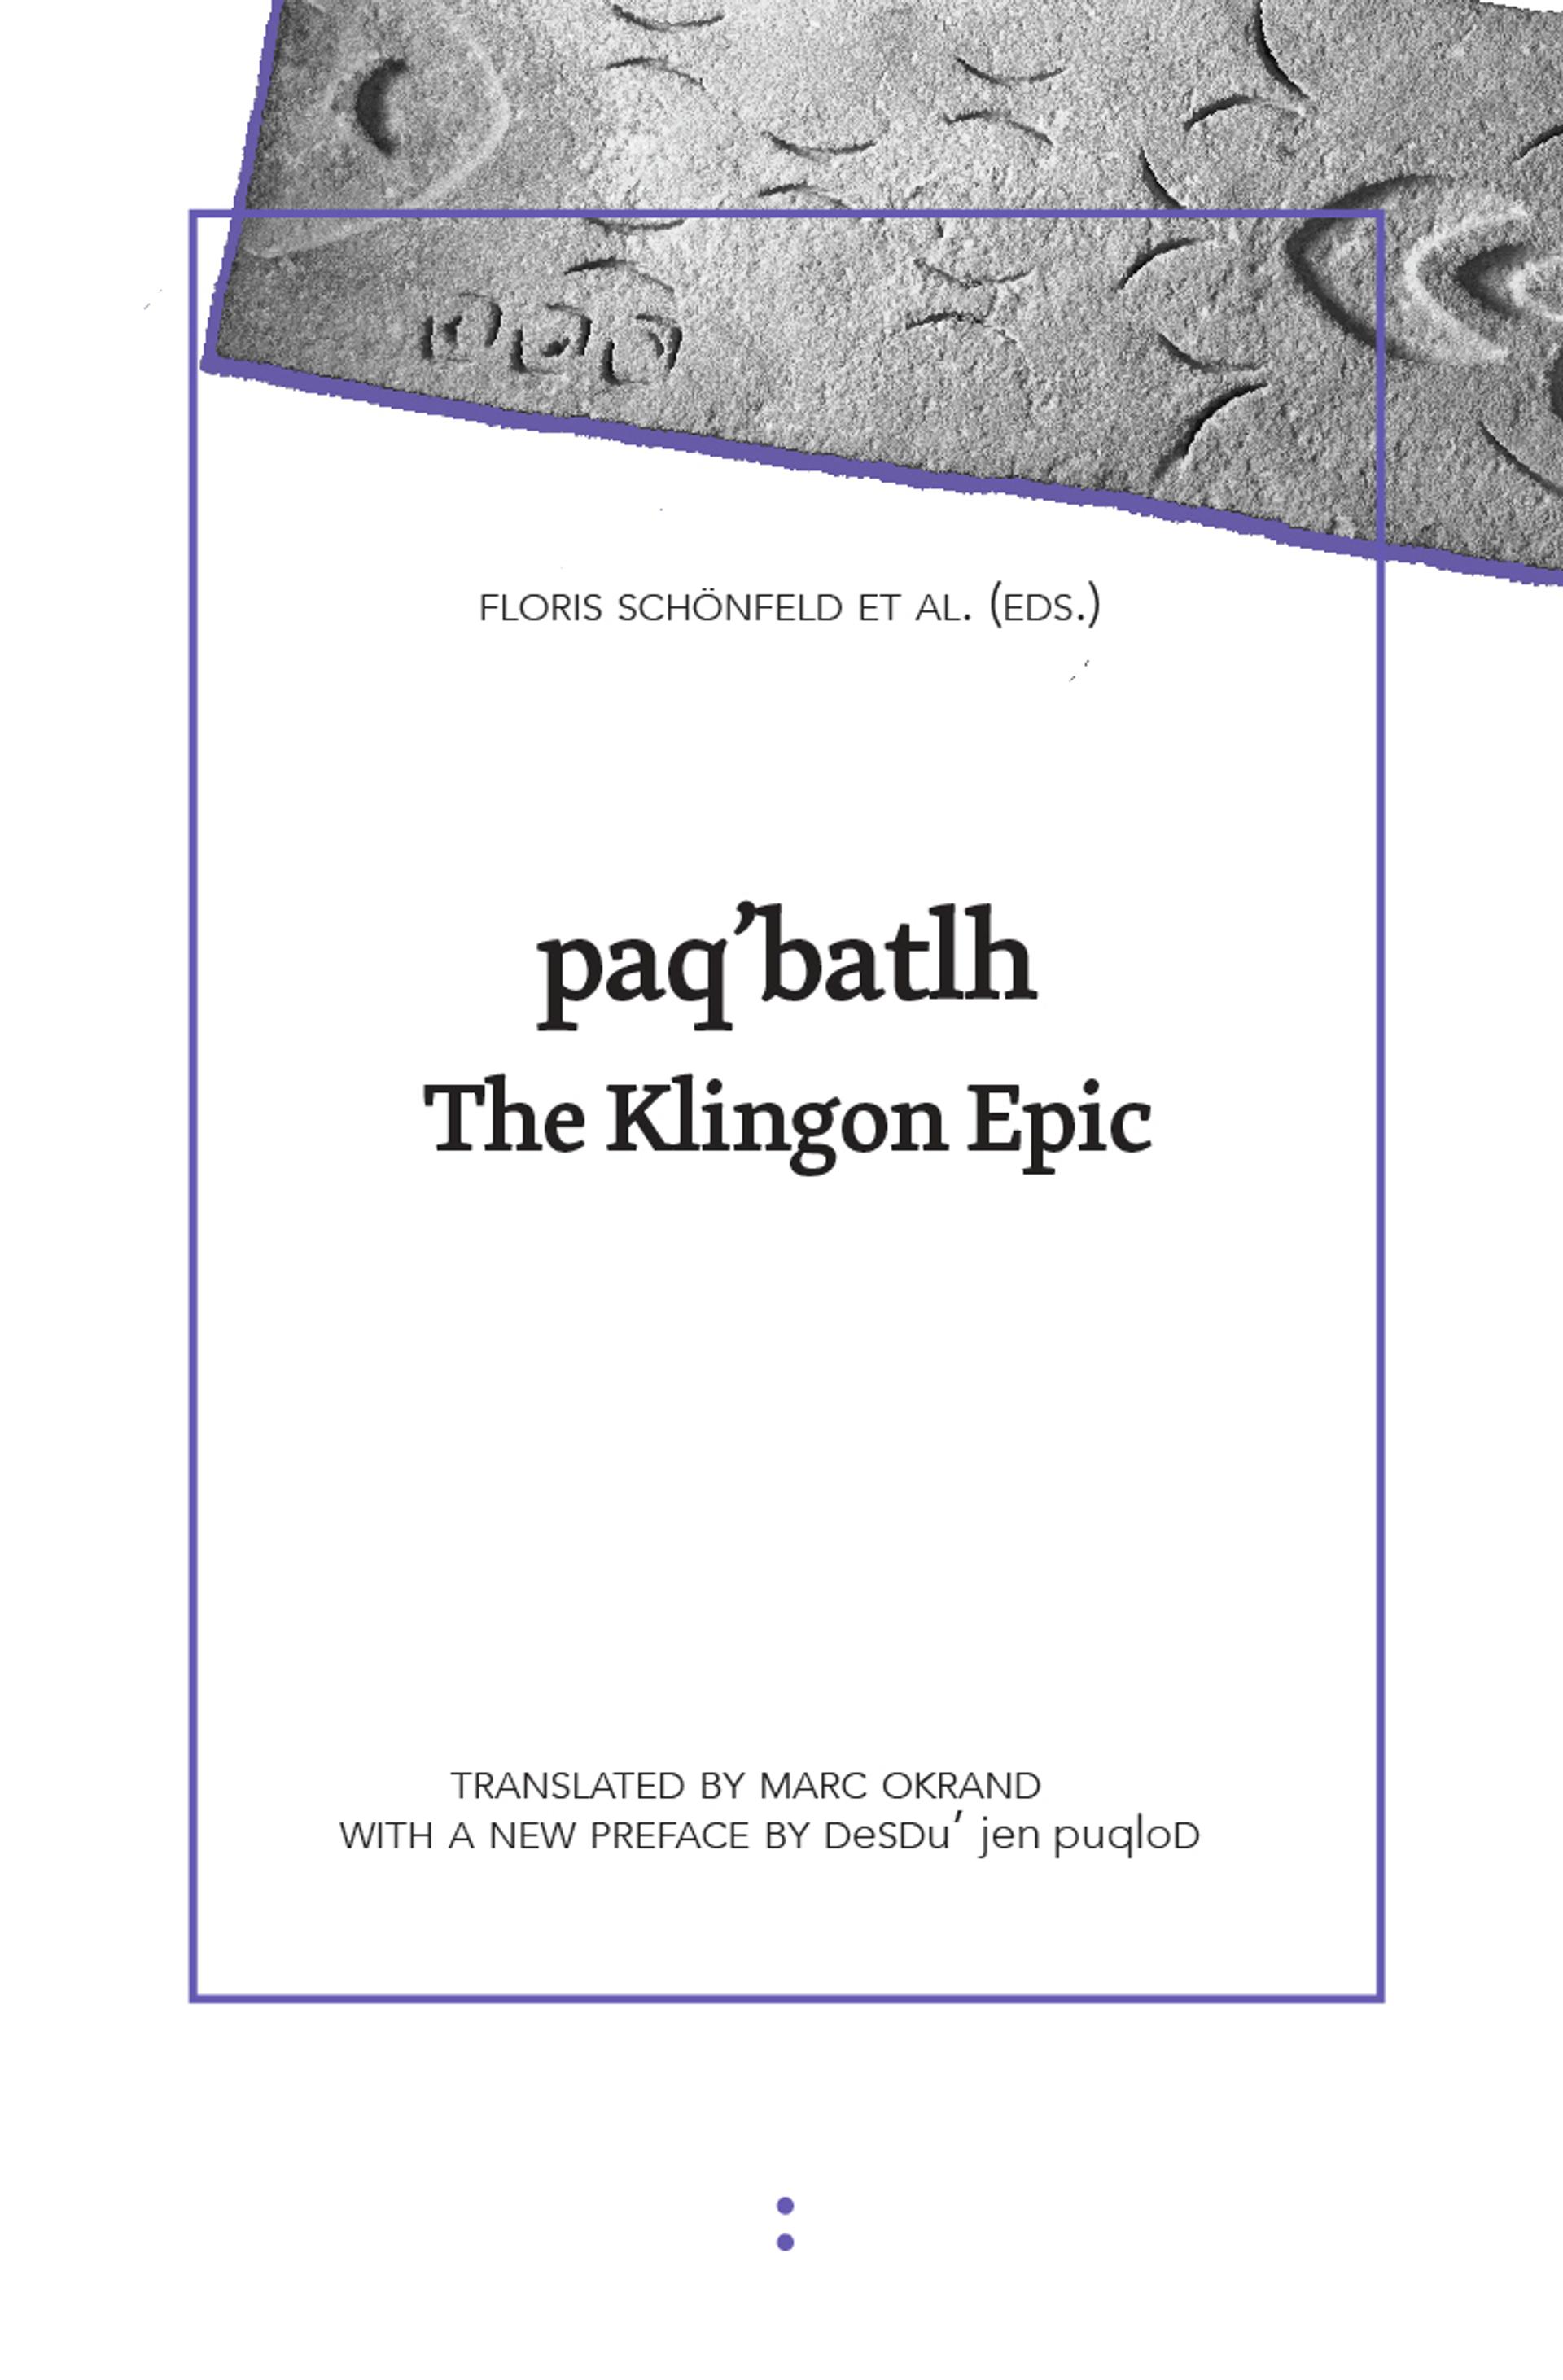 Cover of book titled paq'batlh: The Klingon Epic (2nd edn.)